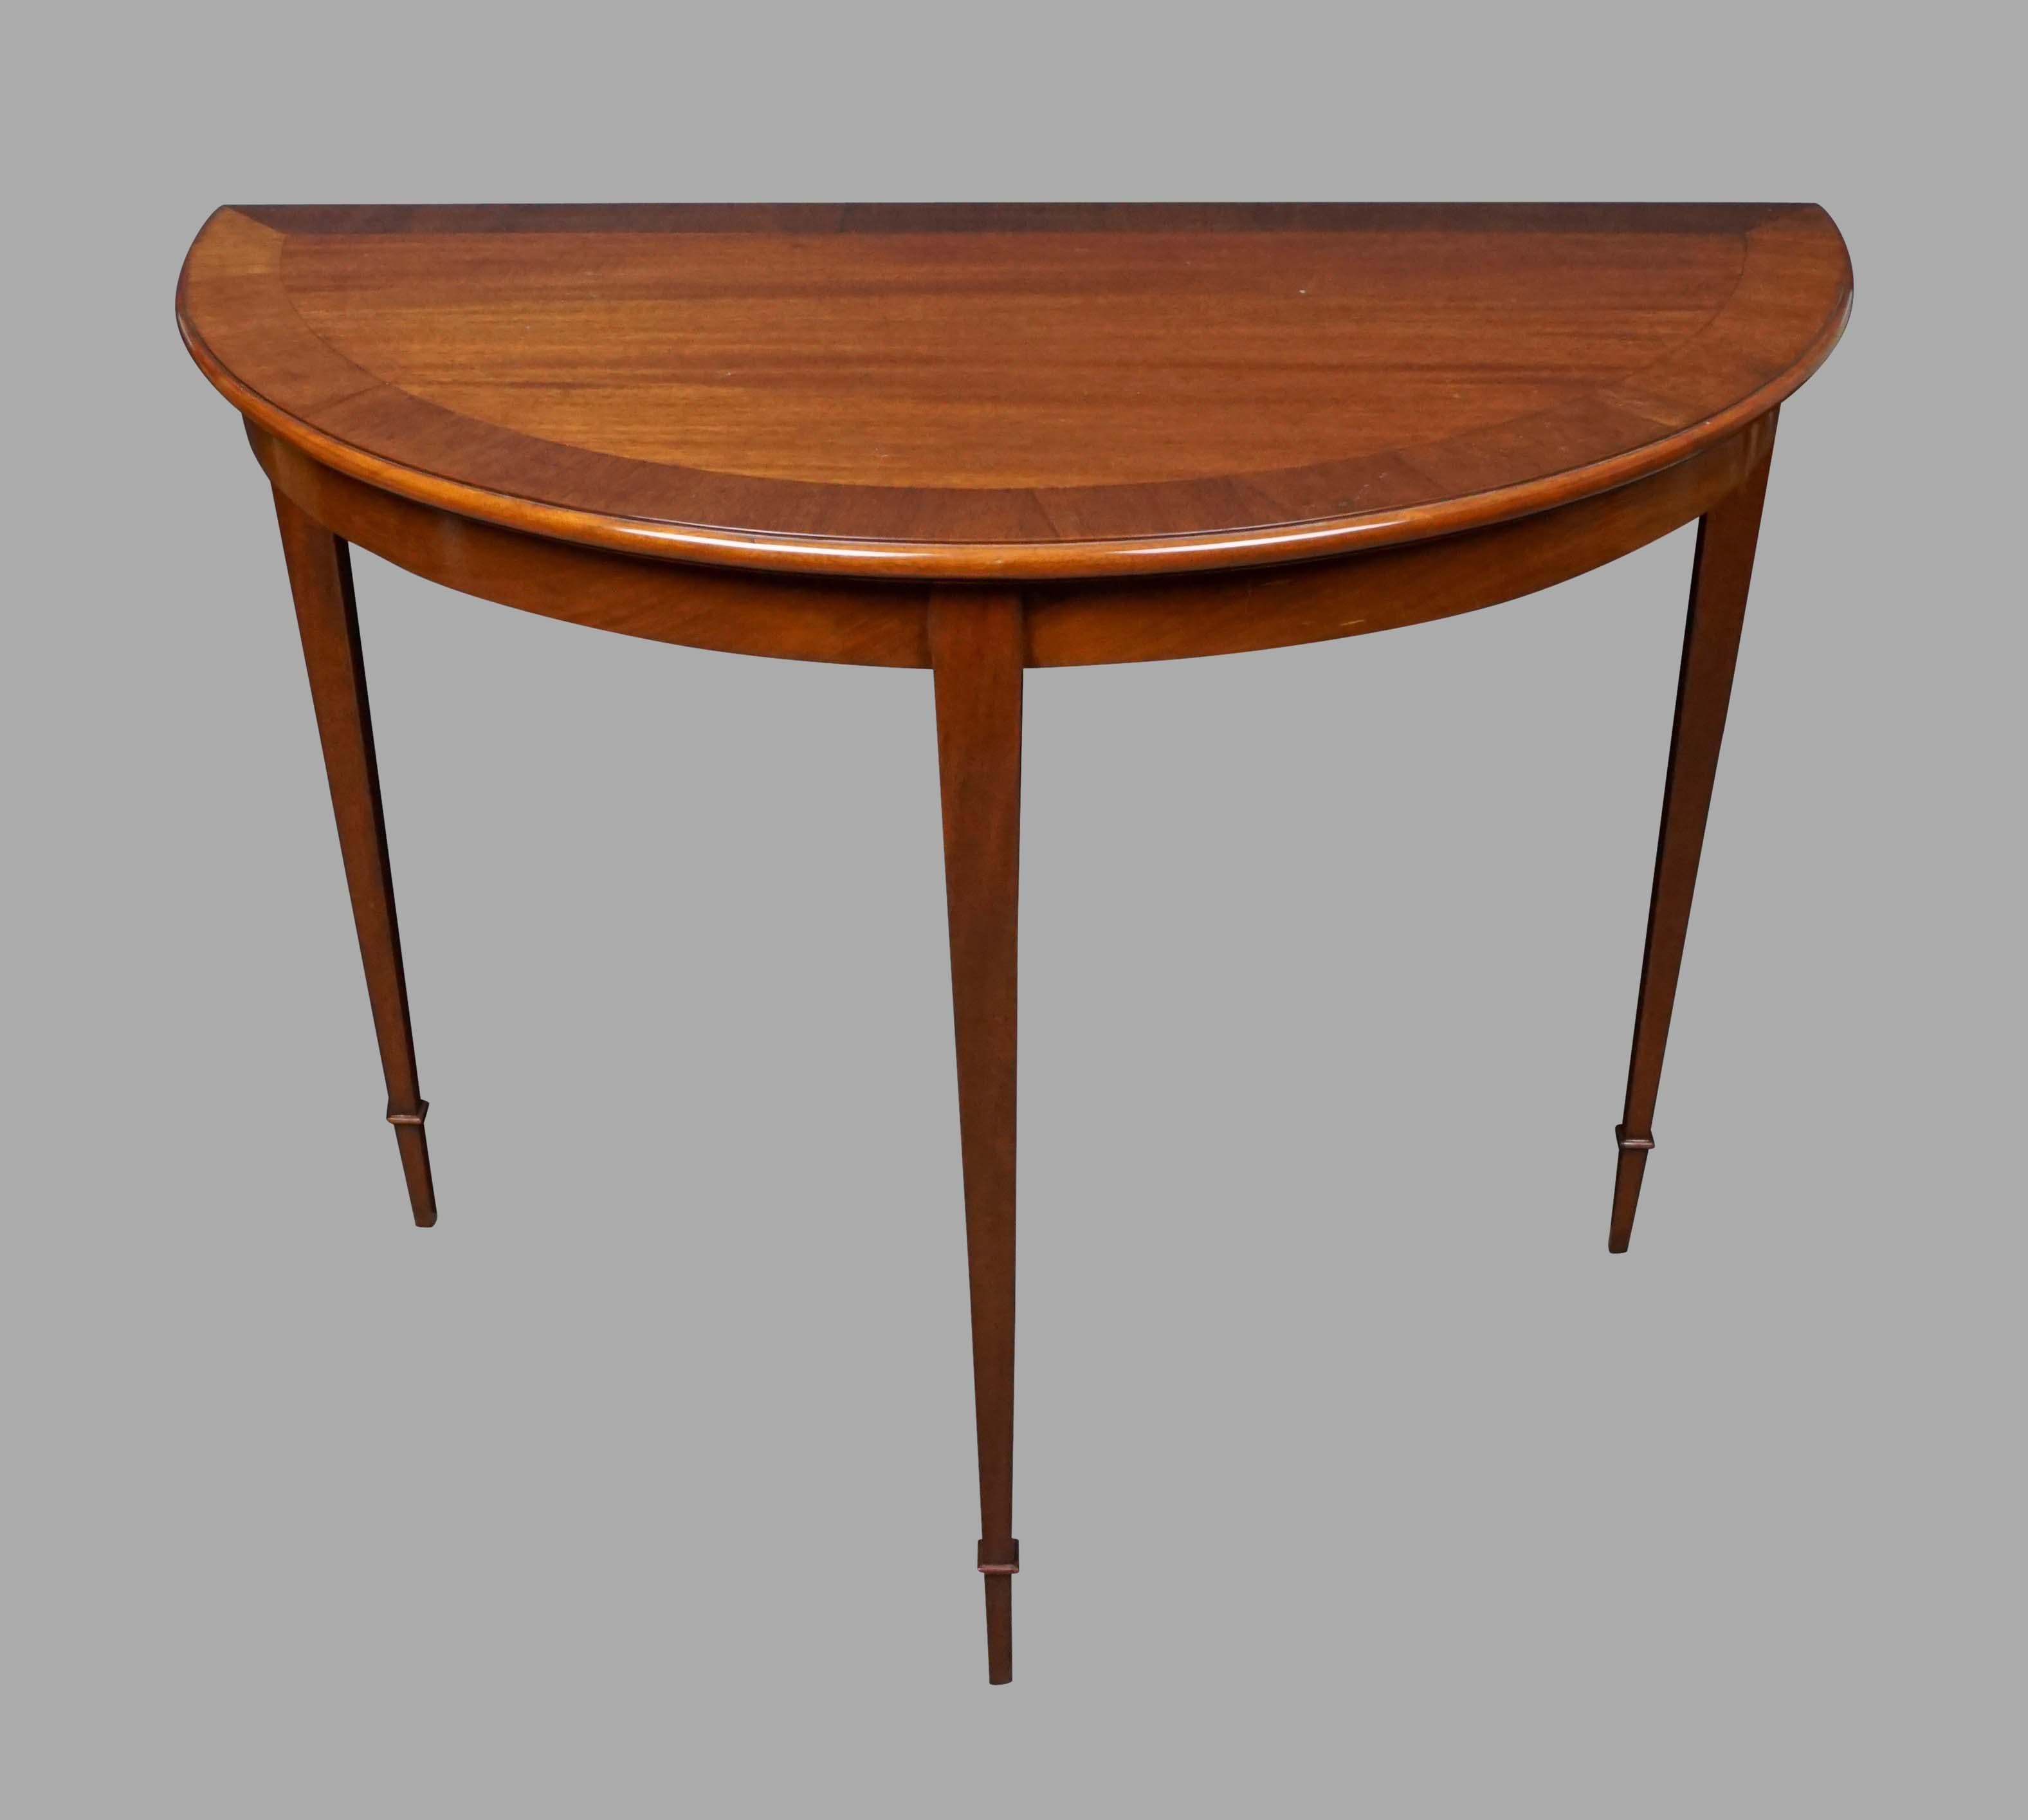 An attractive pair of mahogany demilune tables with crossbanded tops made and signed by well-known San Francisco cabinetmaker Claudio Mariani, each table with a crossbanded top supported by square tapering legs. An elegant reinterpretation of a